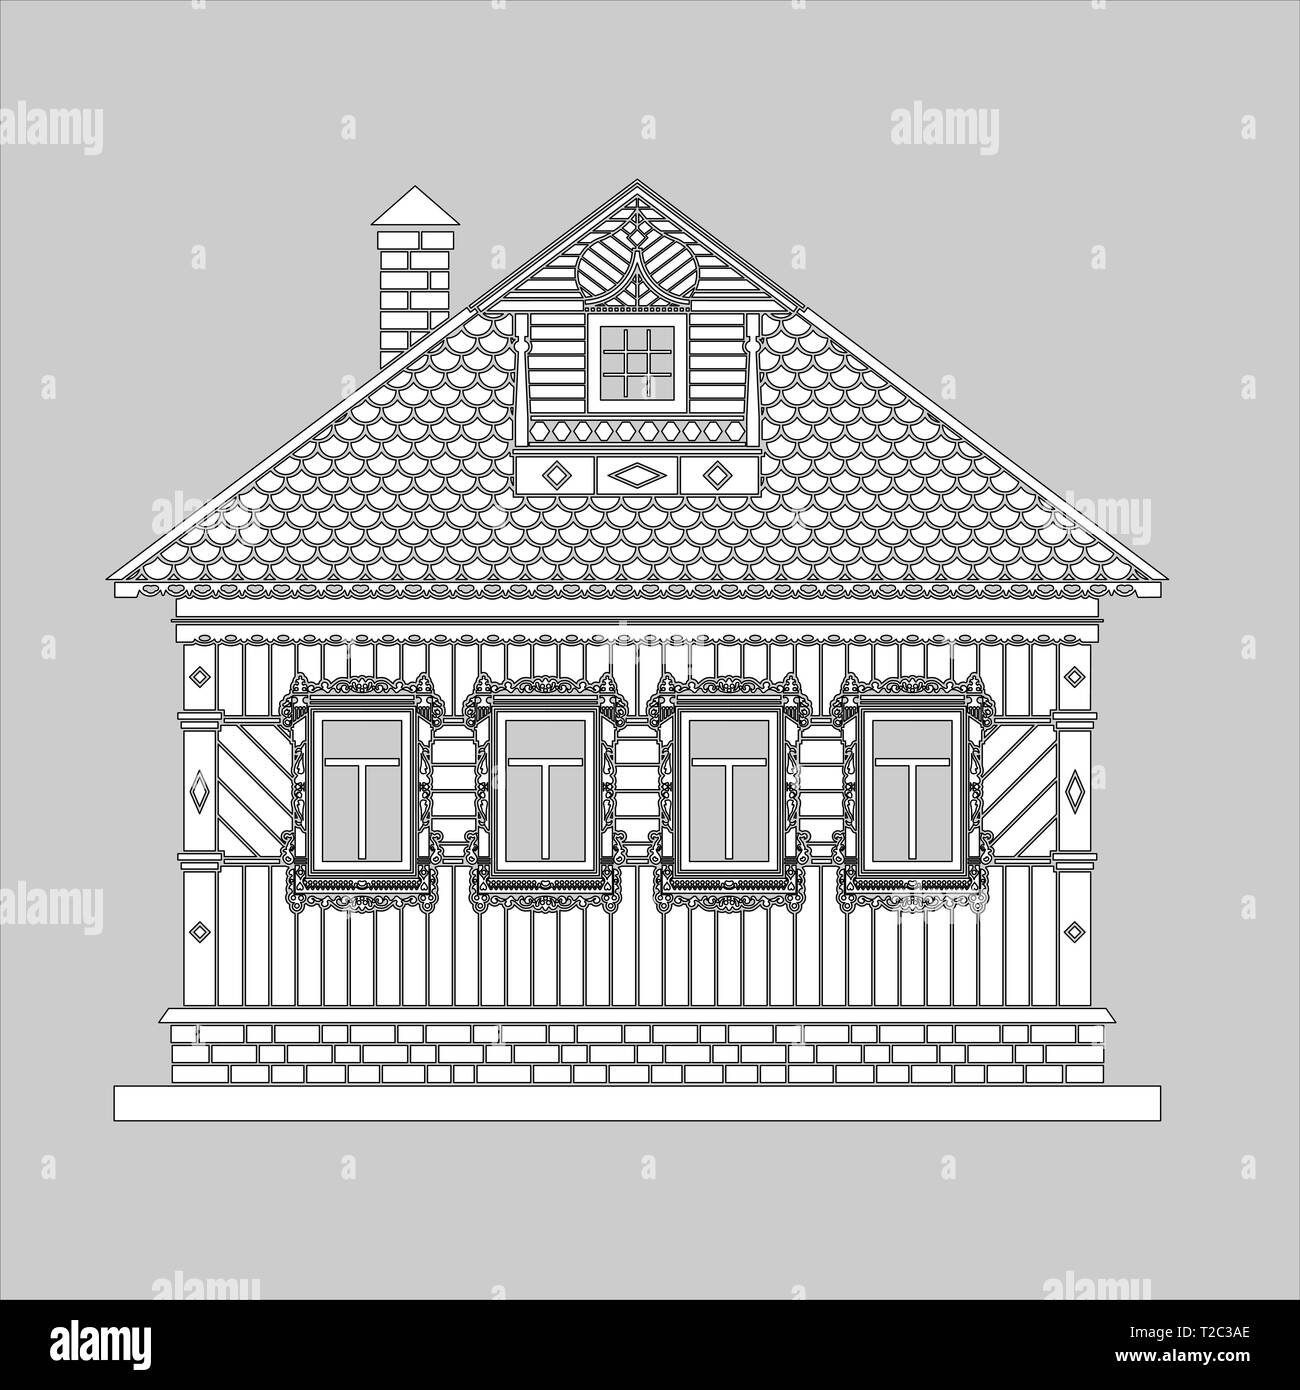 Russian traditional two-story wooden house. The windows and details are decorated with carvings. Vector illustration. Black and white silhouette. Stock Vector